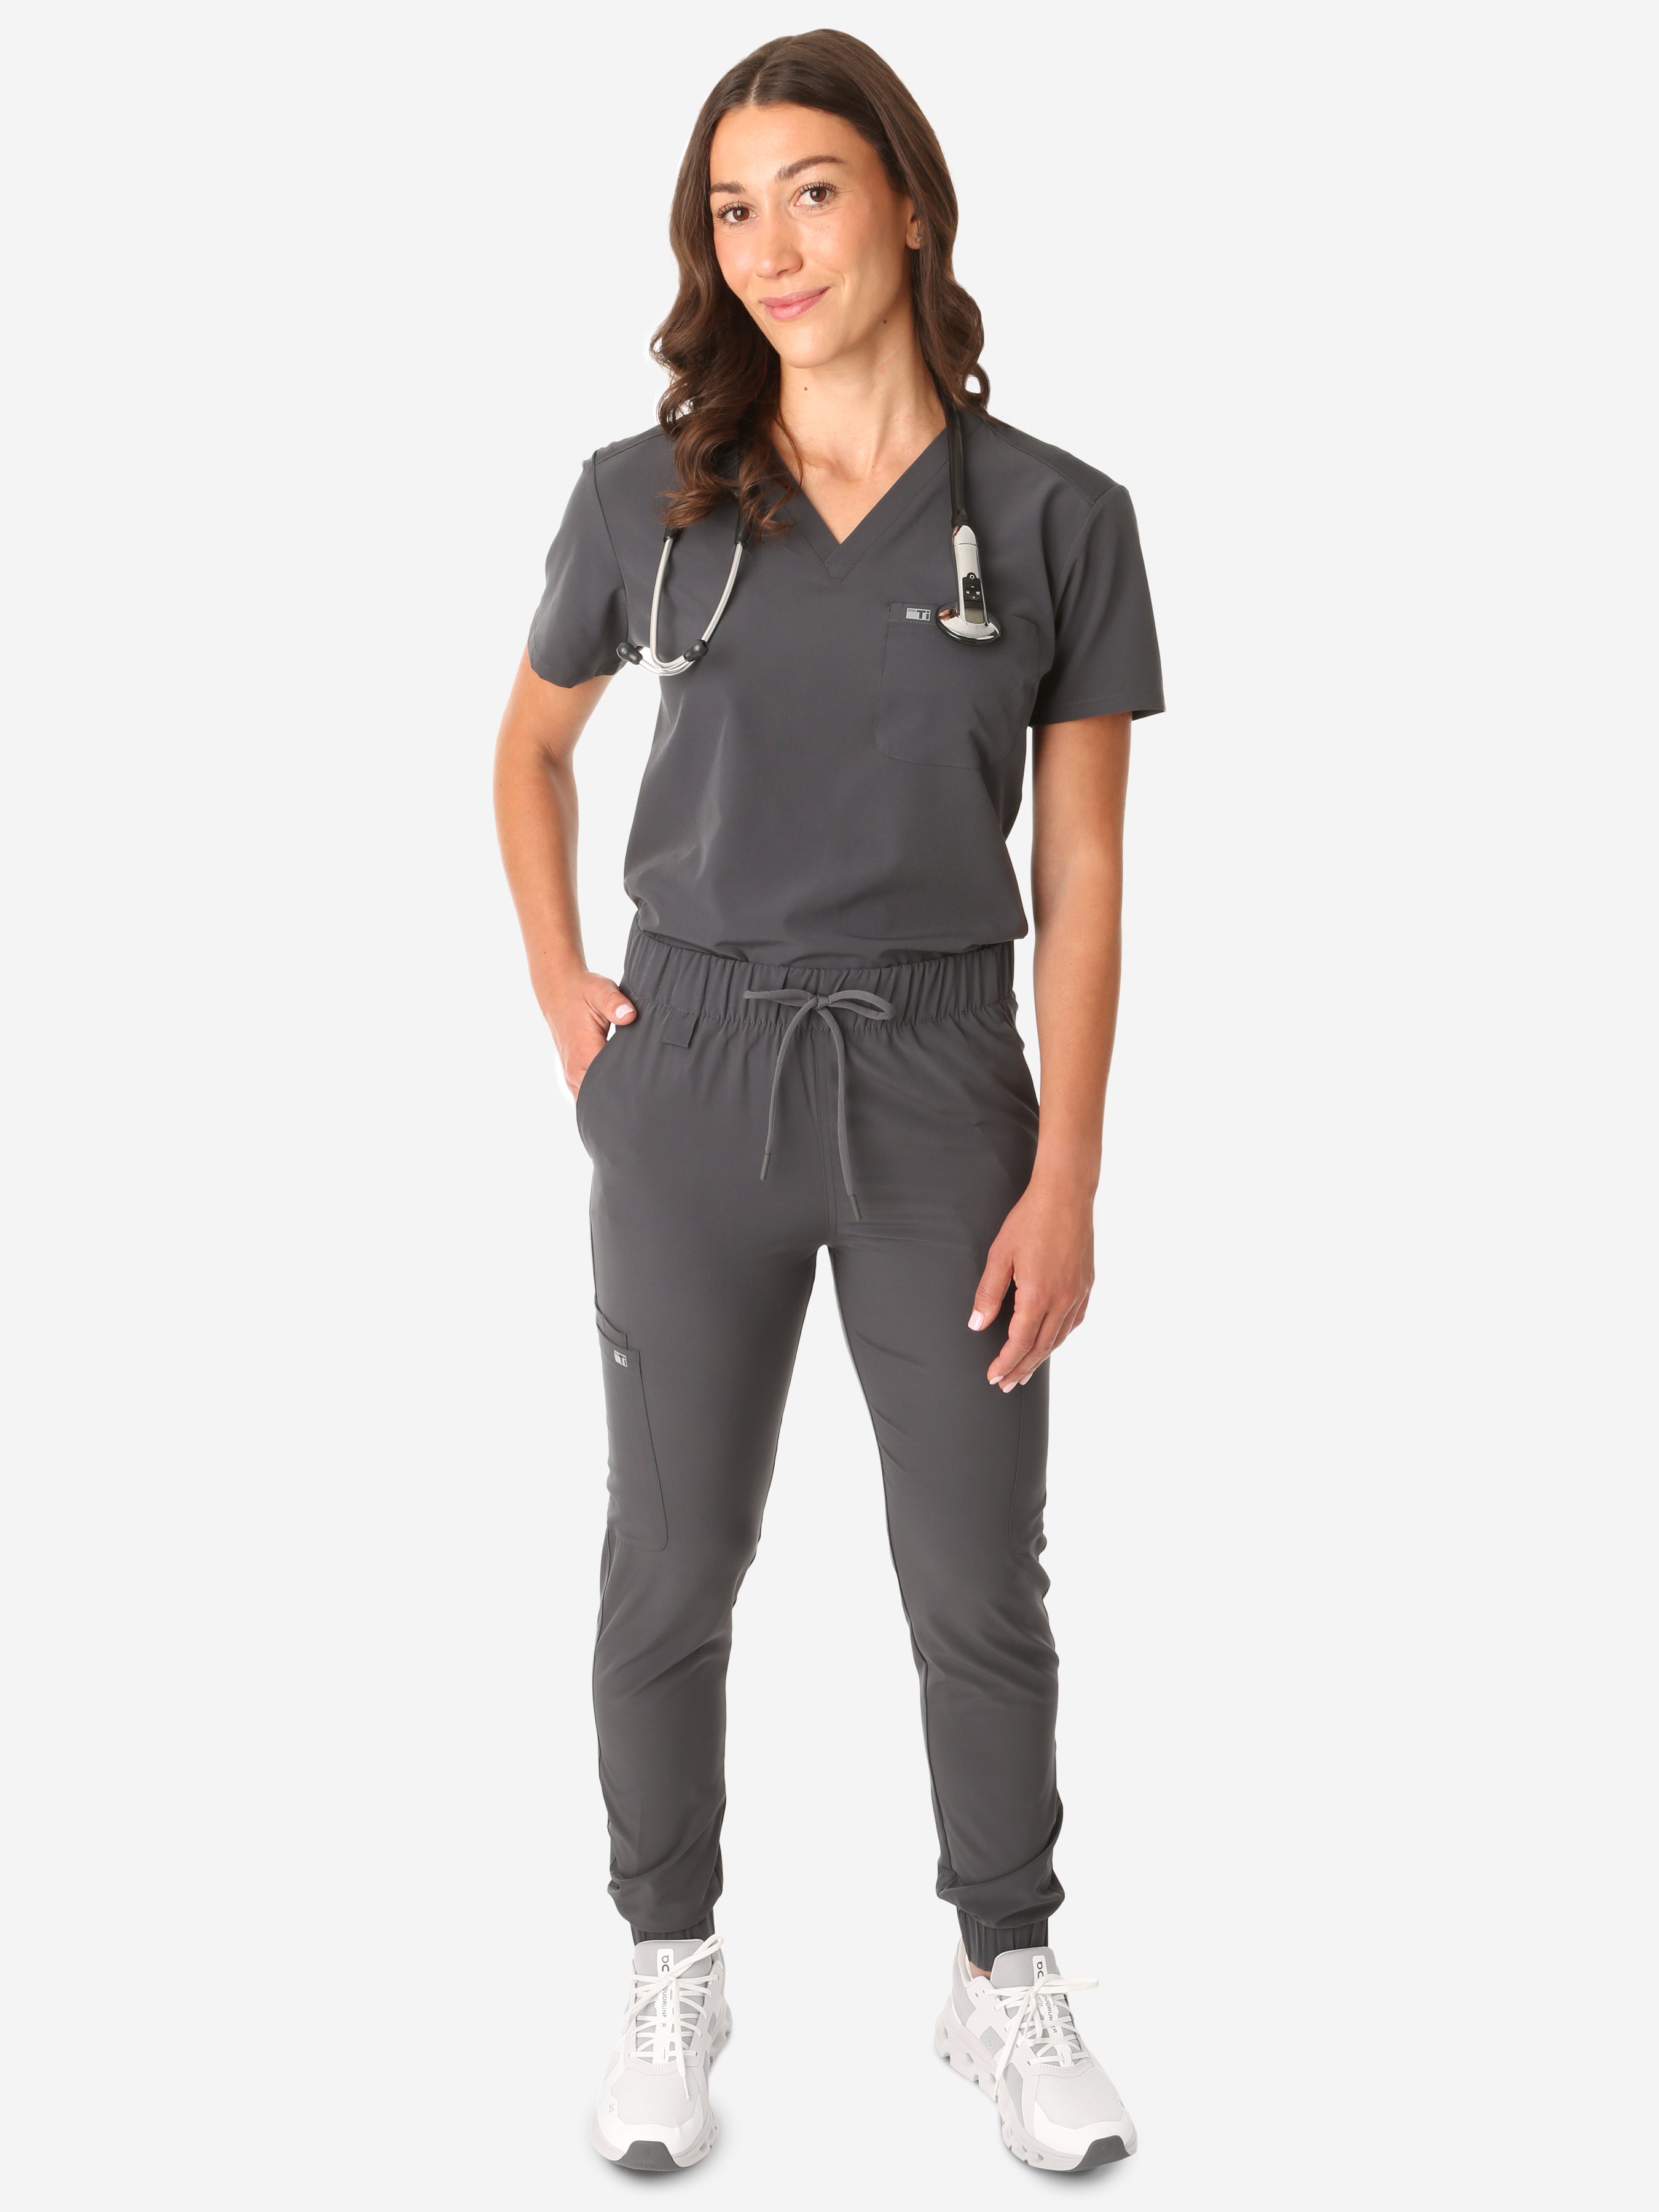 TiScrubs Charcoal Gray Women&#39;s Stretch Perfect Jogger Pants and One-Pocket Tuckable Top Front View Full Body